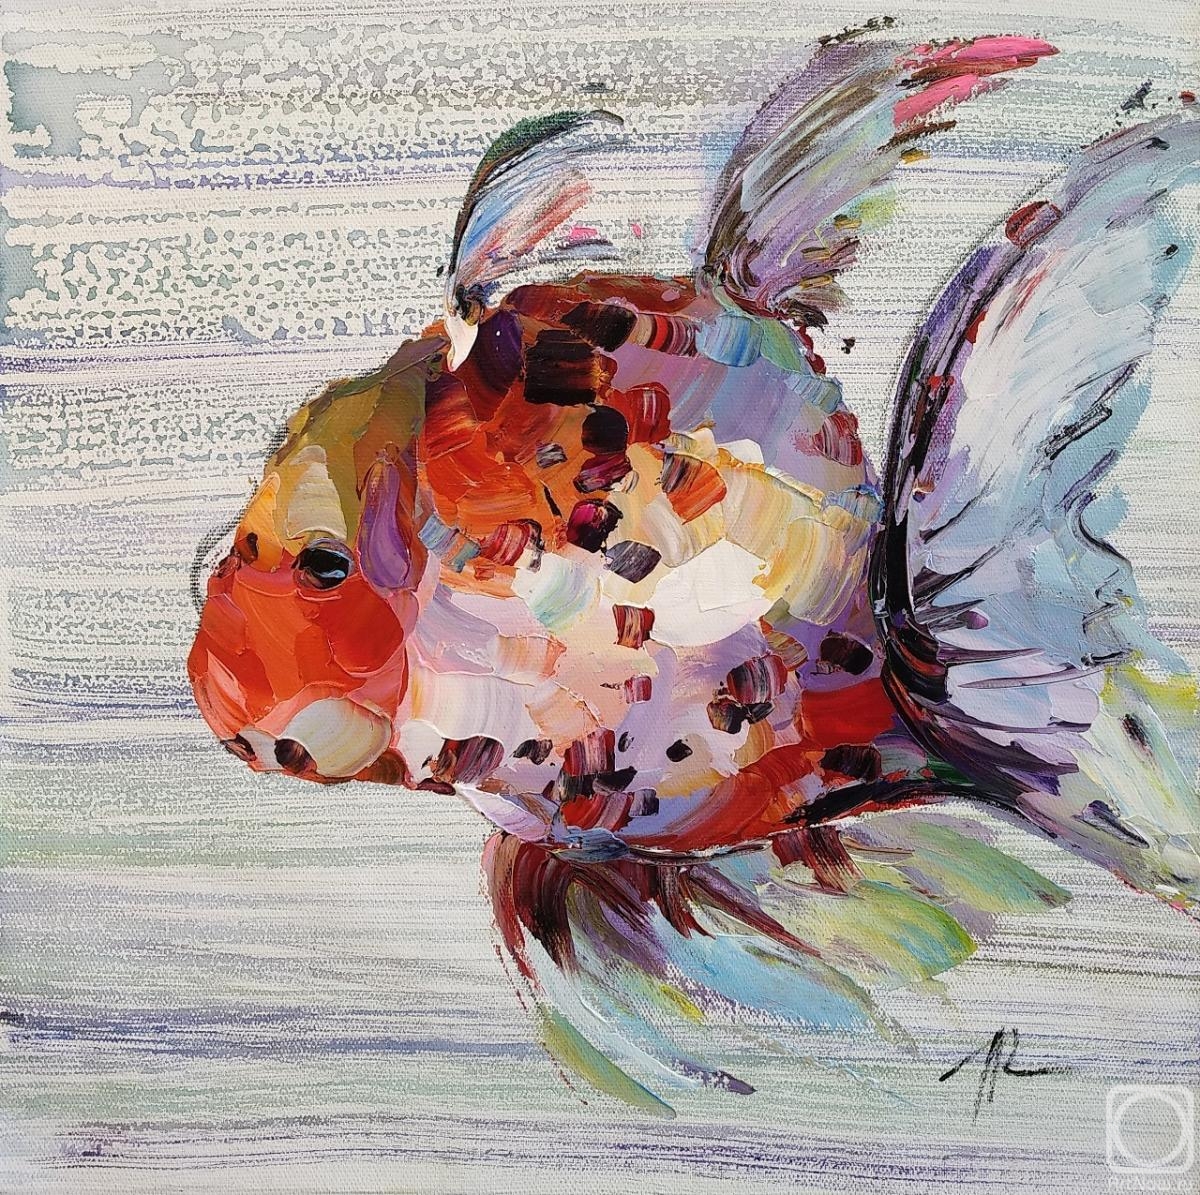 Rodries Jose. Goldfish for the fulfillment of desires. N6